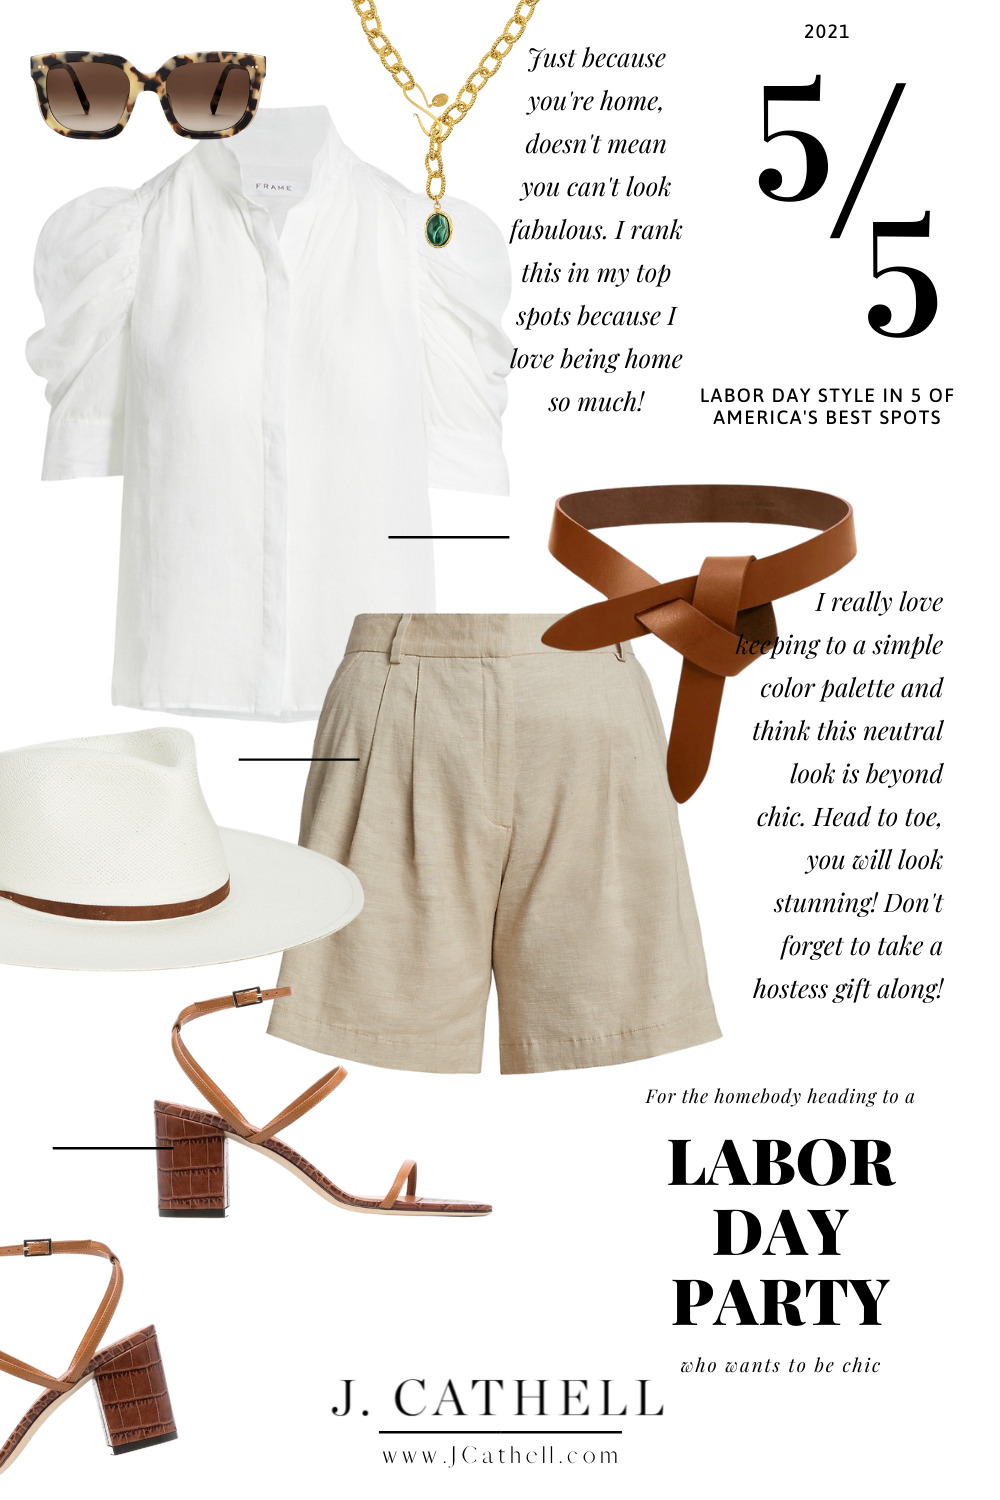 Labor Day Style in 5 Of America’s Best Spots - J. Cathell